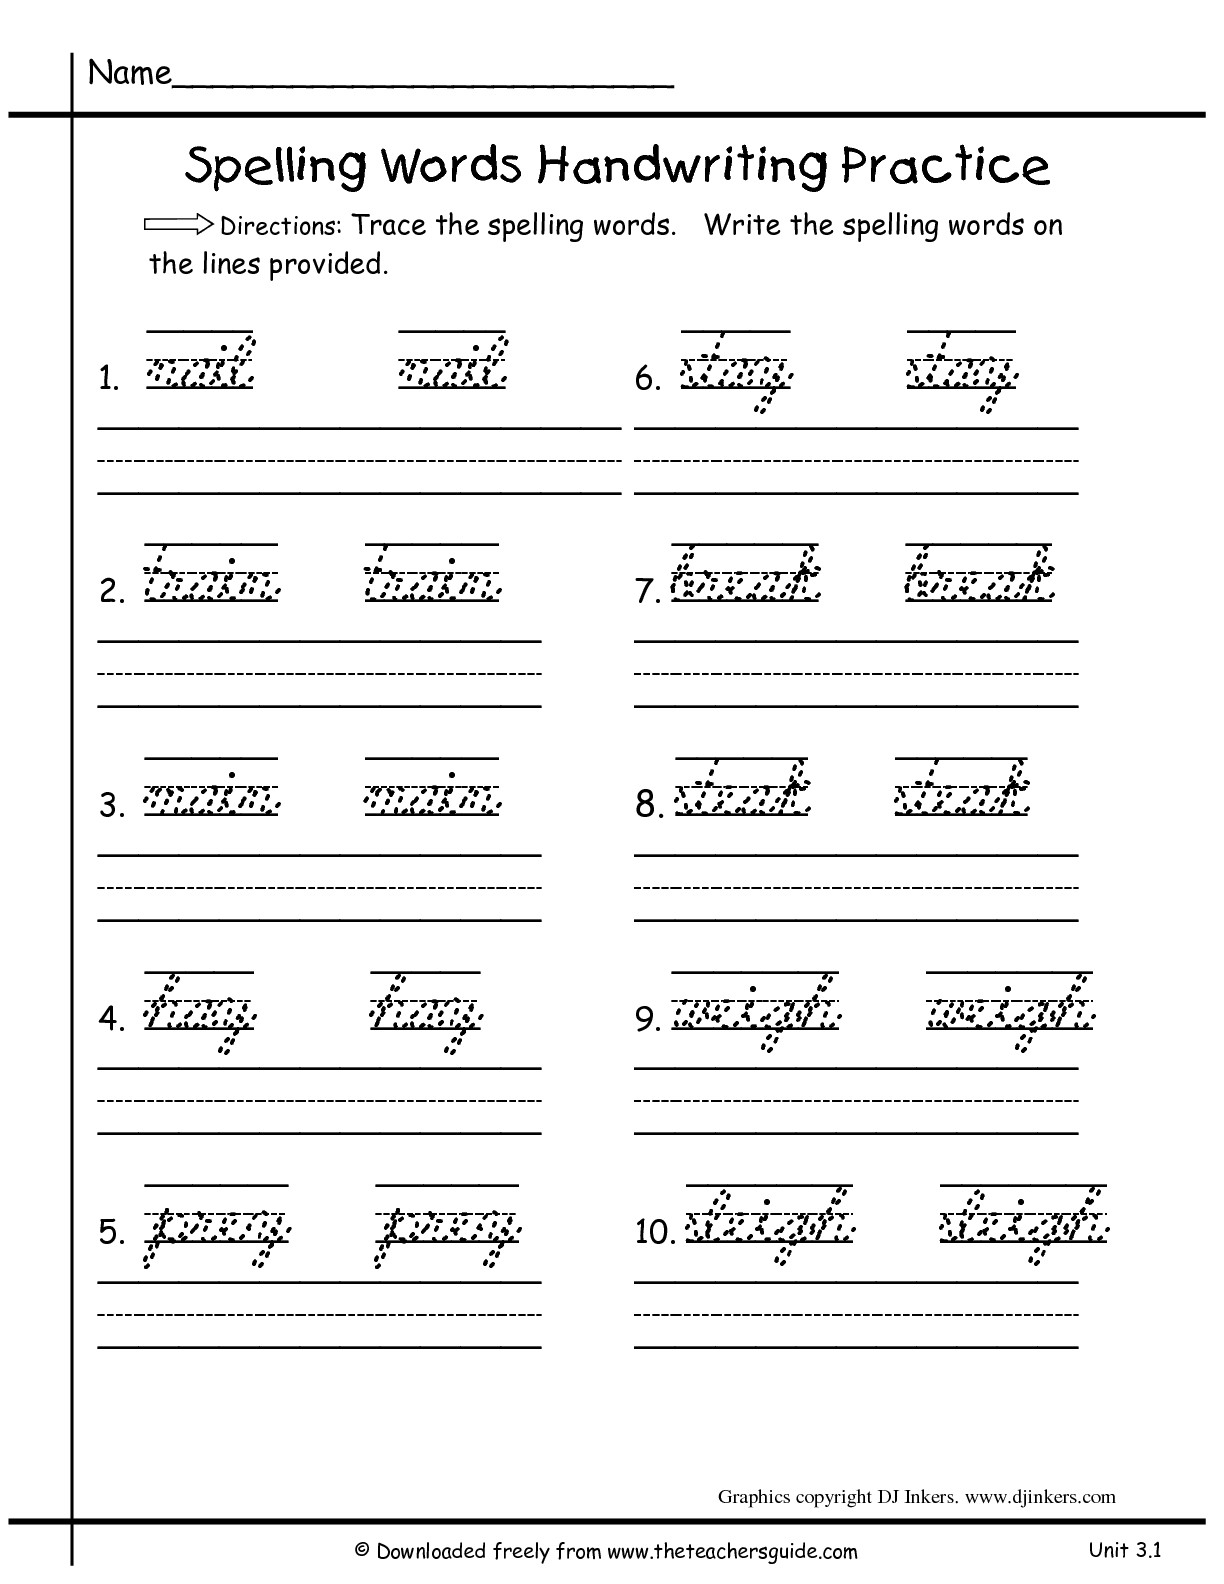 time-for-spelling-year-6-hunter-education-educational-resources-and